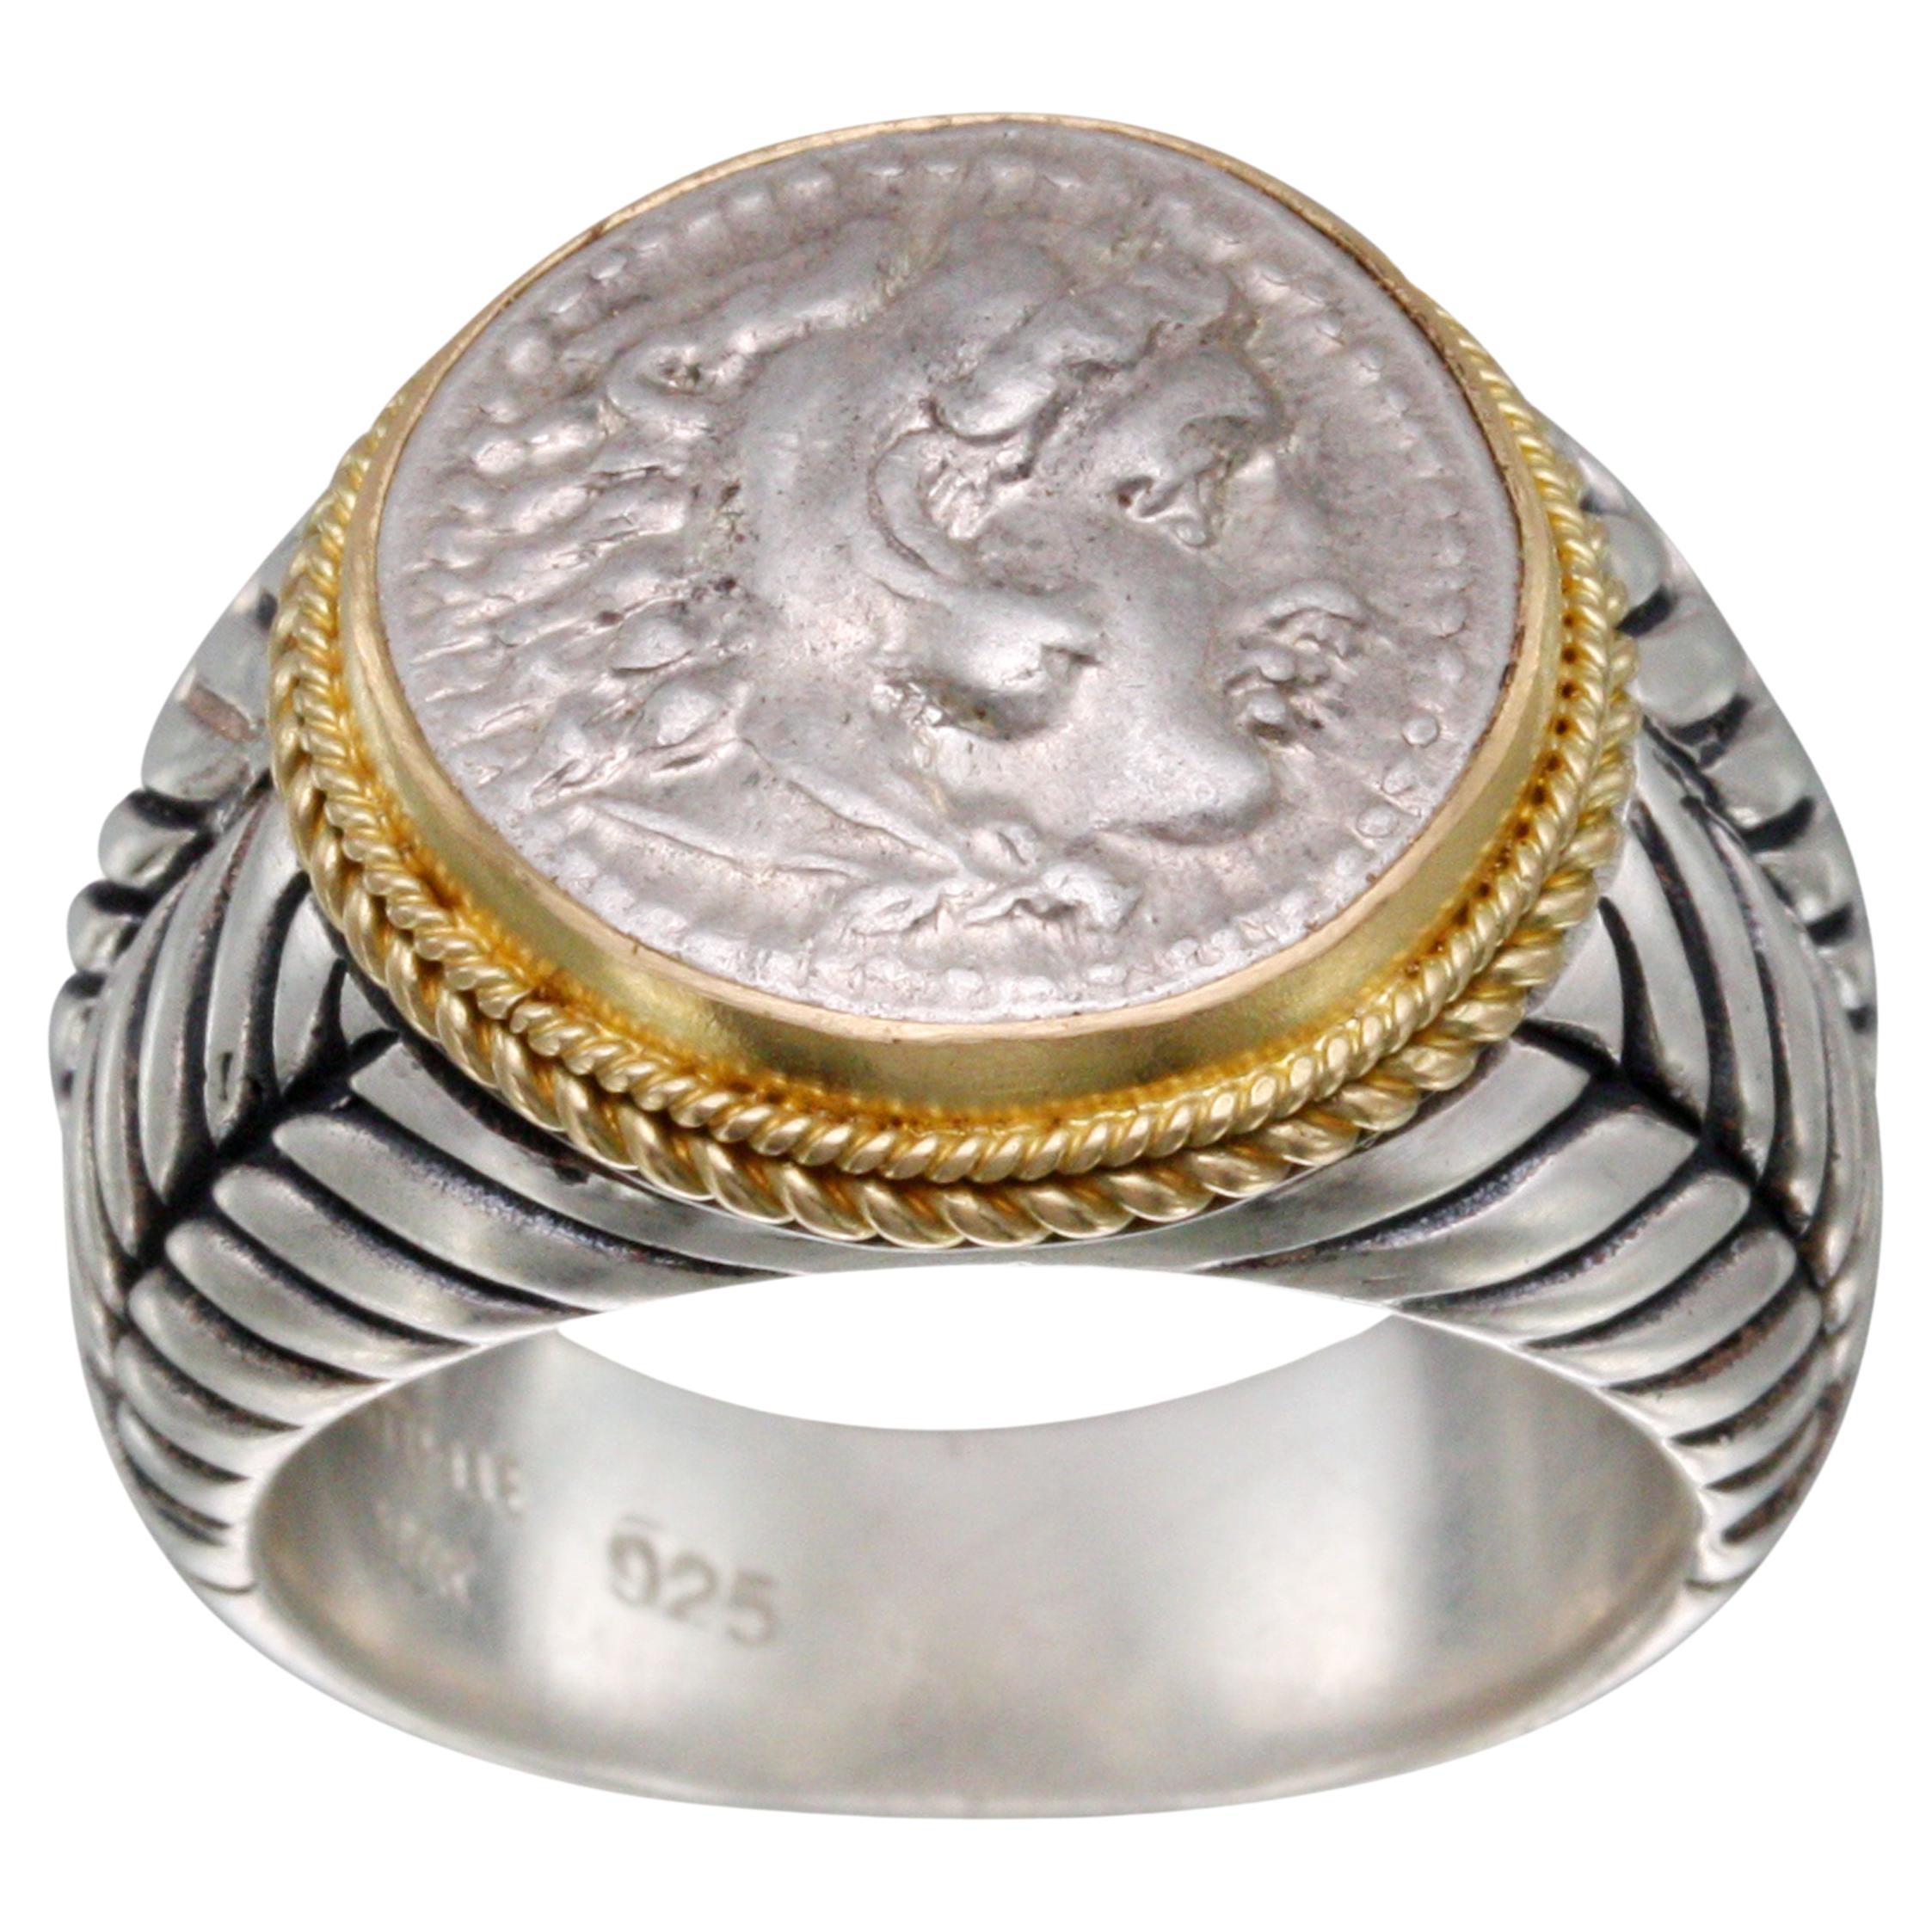 Ancient Greek 4th Century BC Alexander the Great Coin Silver/18K Gold Ring